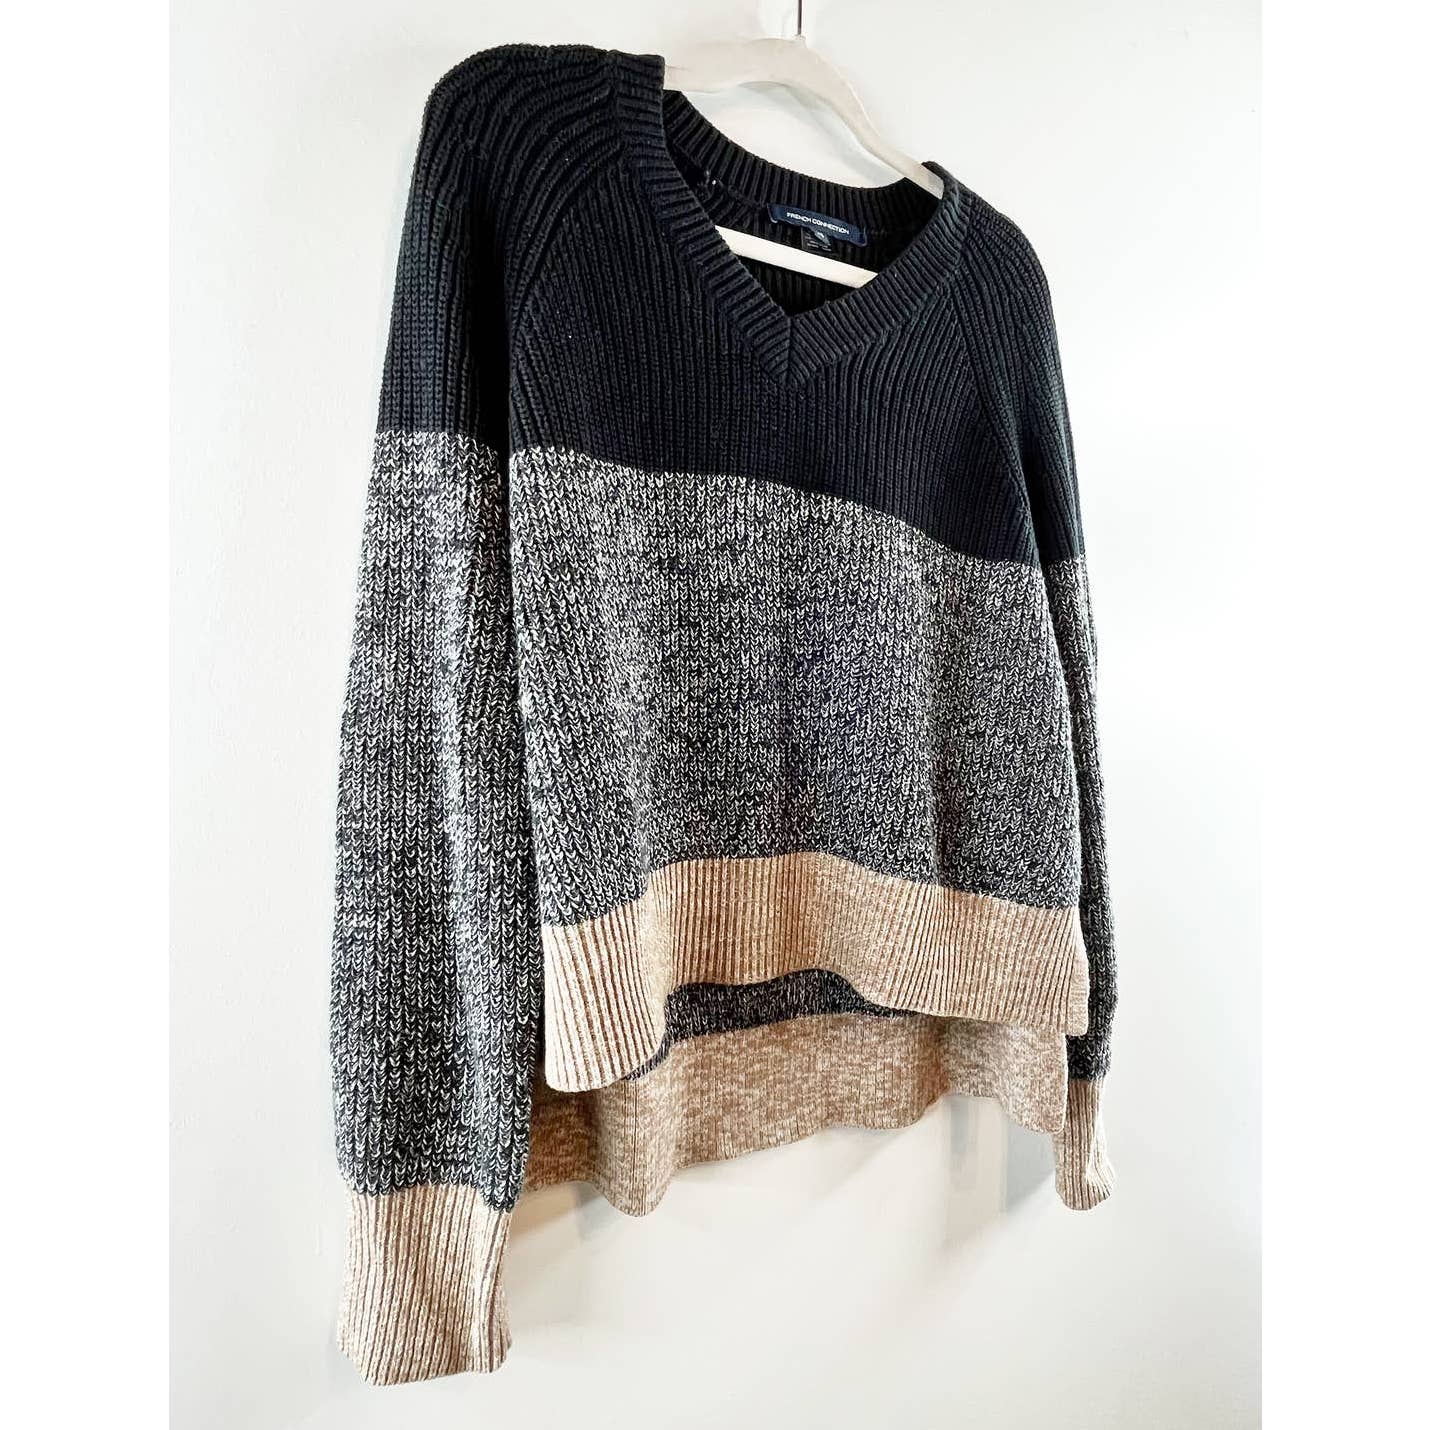 French Connection Lottie Colorblock Long Sleeve Pullover Sweater Black/Gray XS